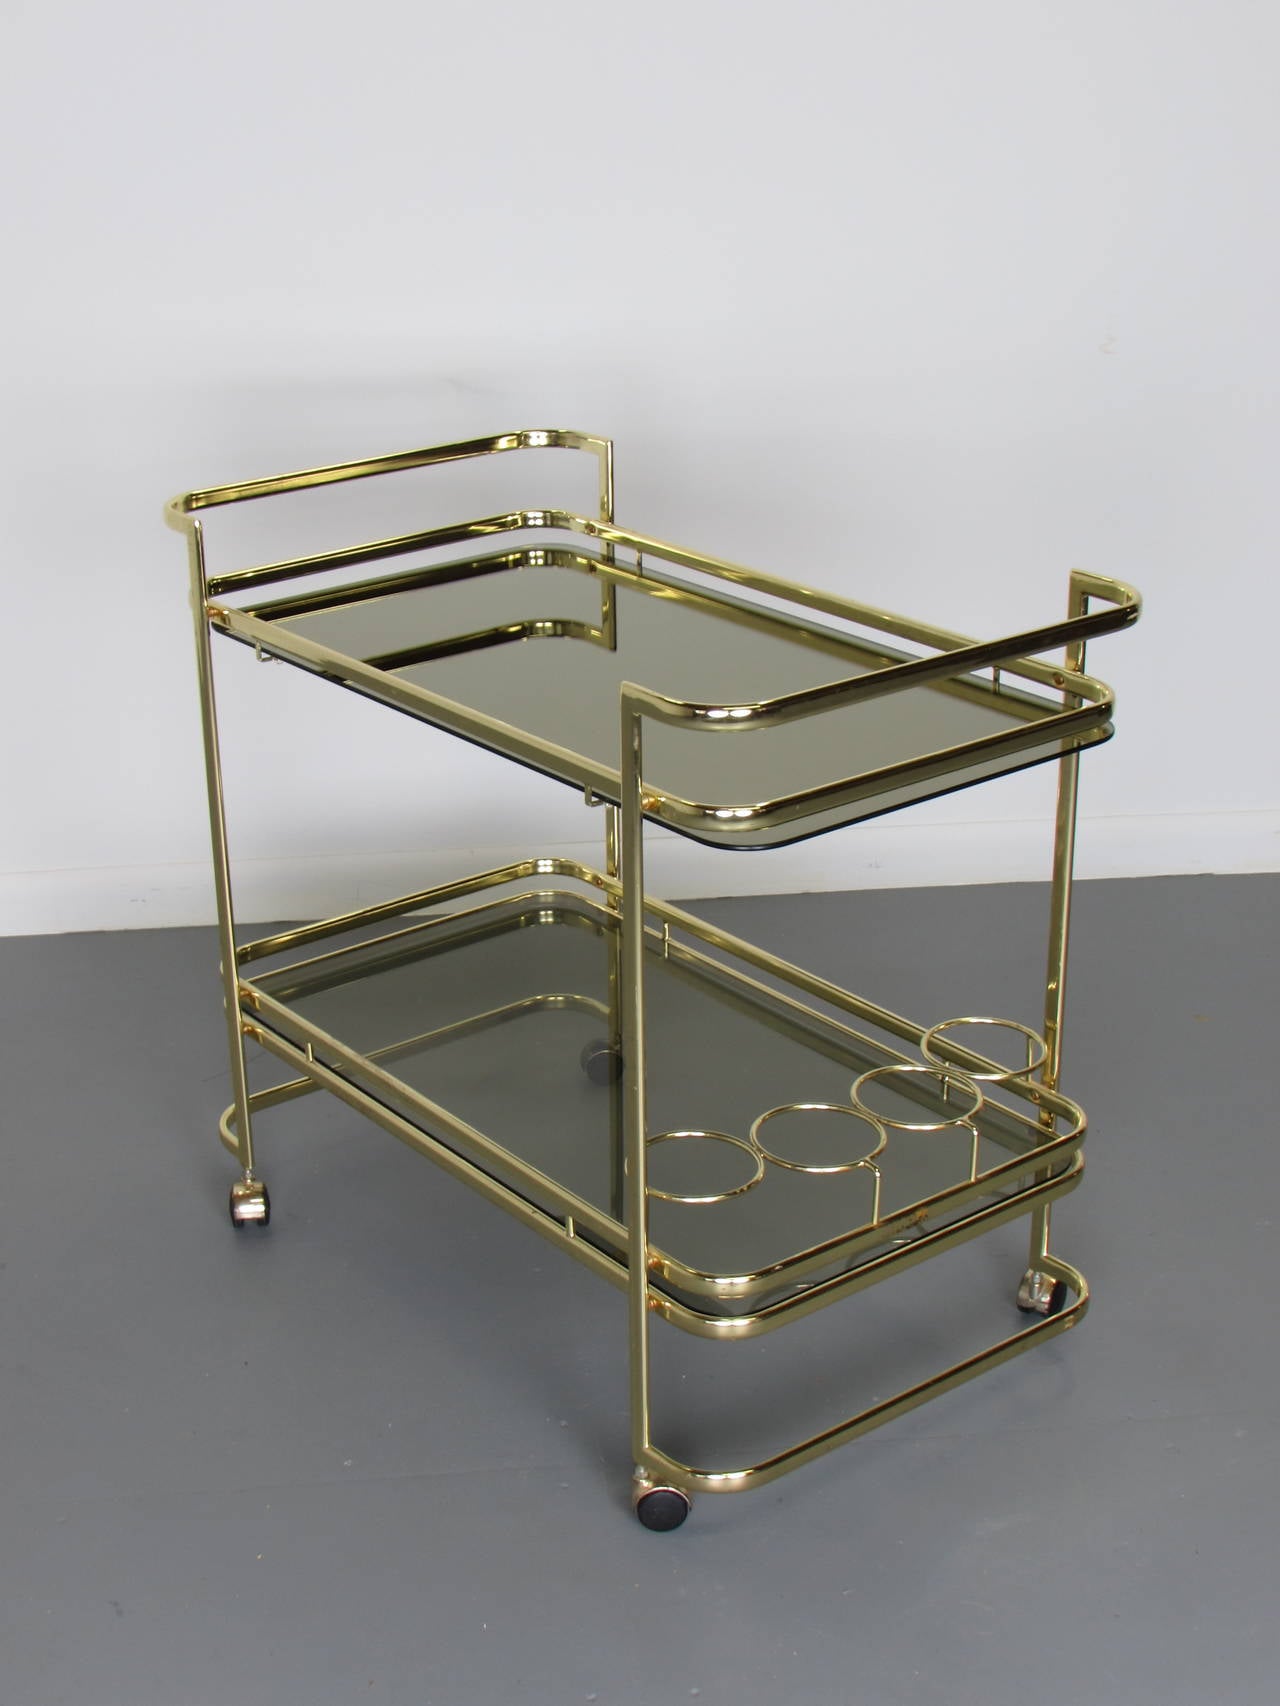 Beautiful brass bar cart with smoked glass, 1970s. Brass is in excellent condition with minor wear. Shows beautifully. 

We offer free regular deliveries to NYC and Philadelphia area. Delivery to DC, MD, CT and MA are available if schedule